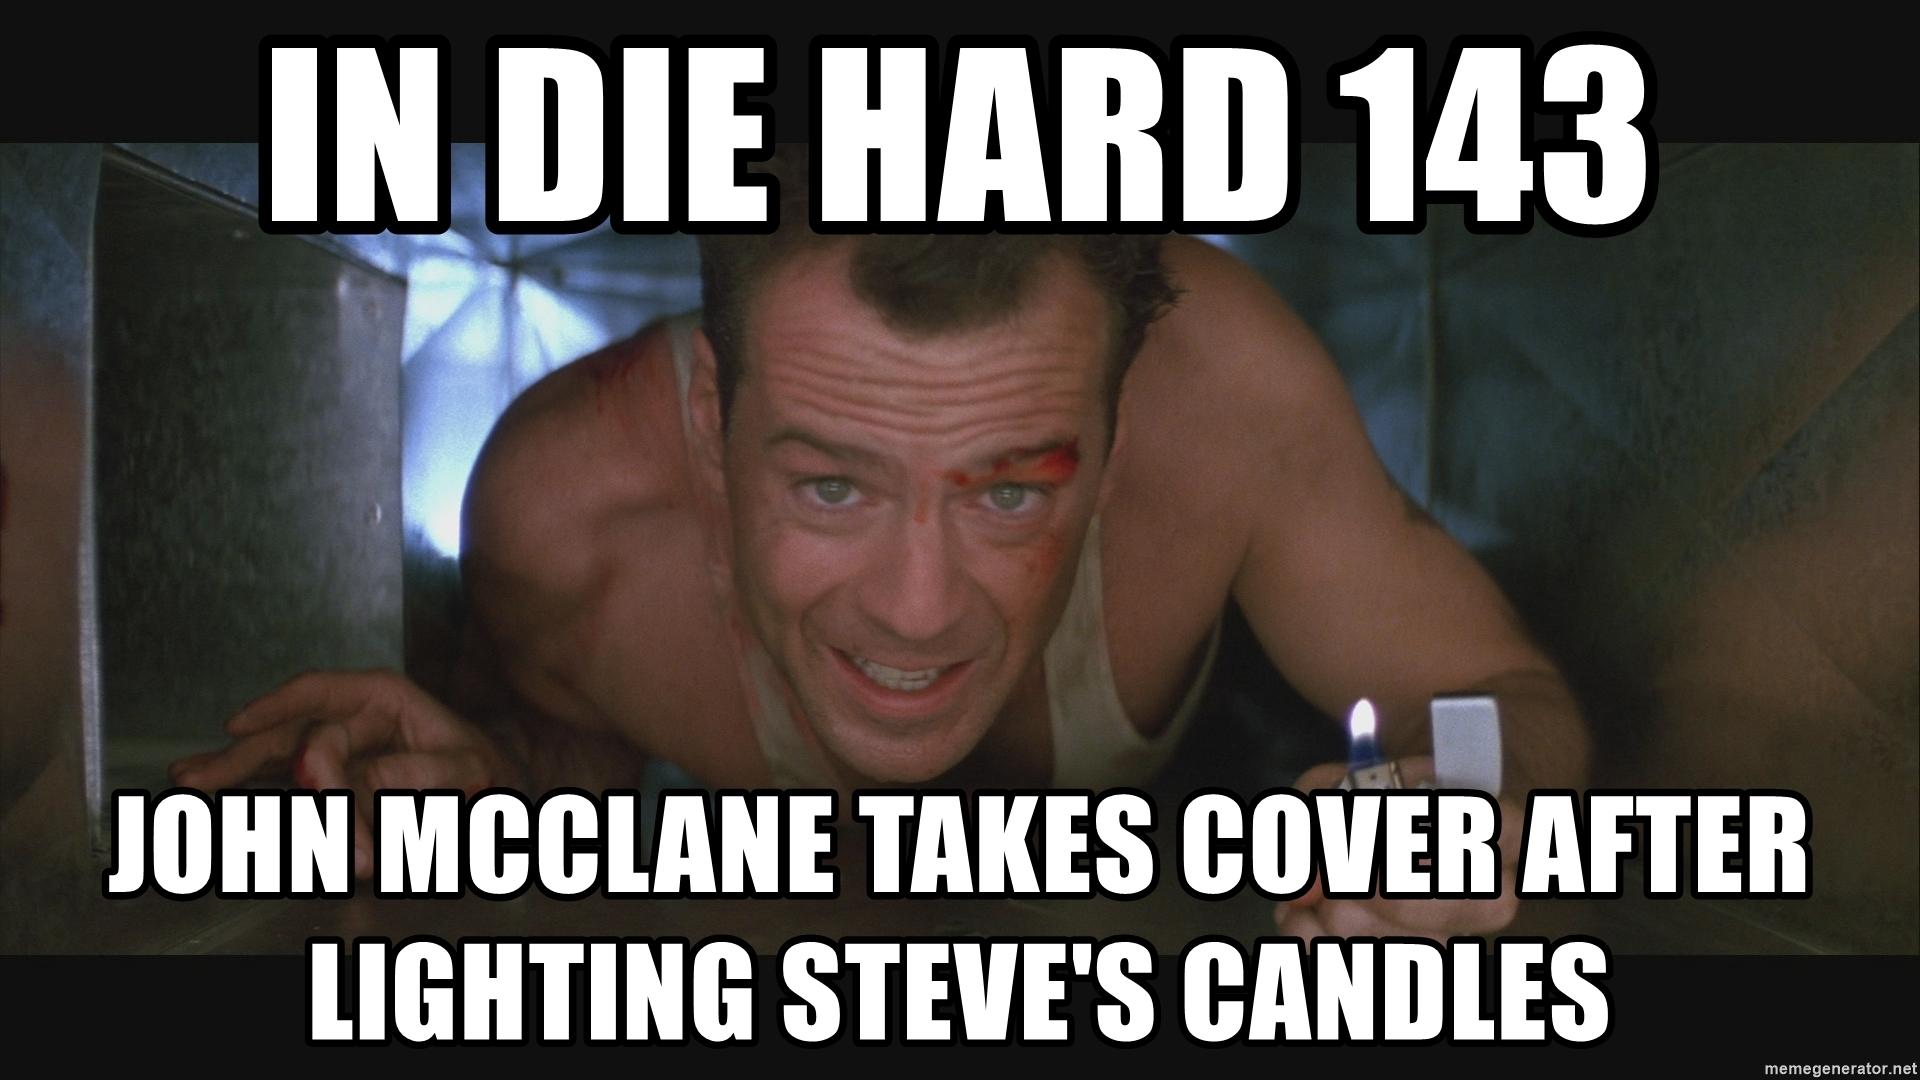 in-die-hard-143-john-mcclane-takes-cover-after-lighting-steves-candles